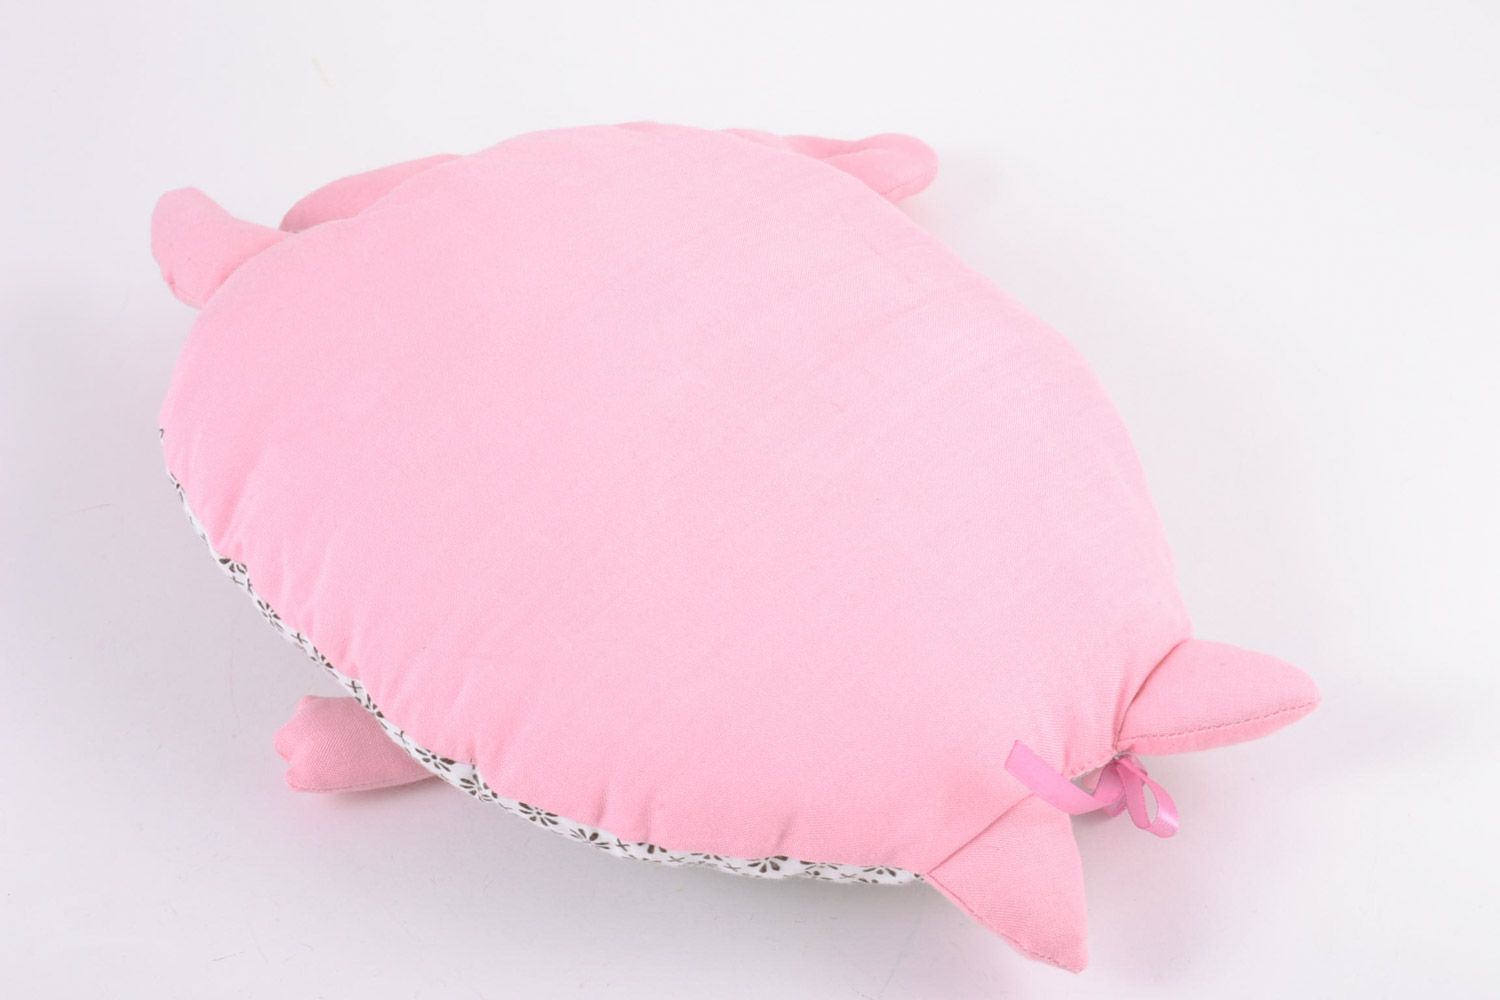 Homemade decorative interior soft pillow pet in pink and gray colors sleepy cat photo 4